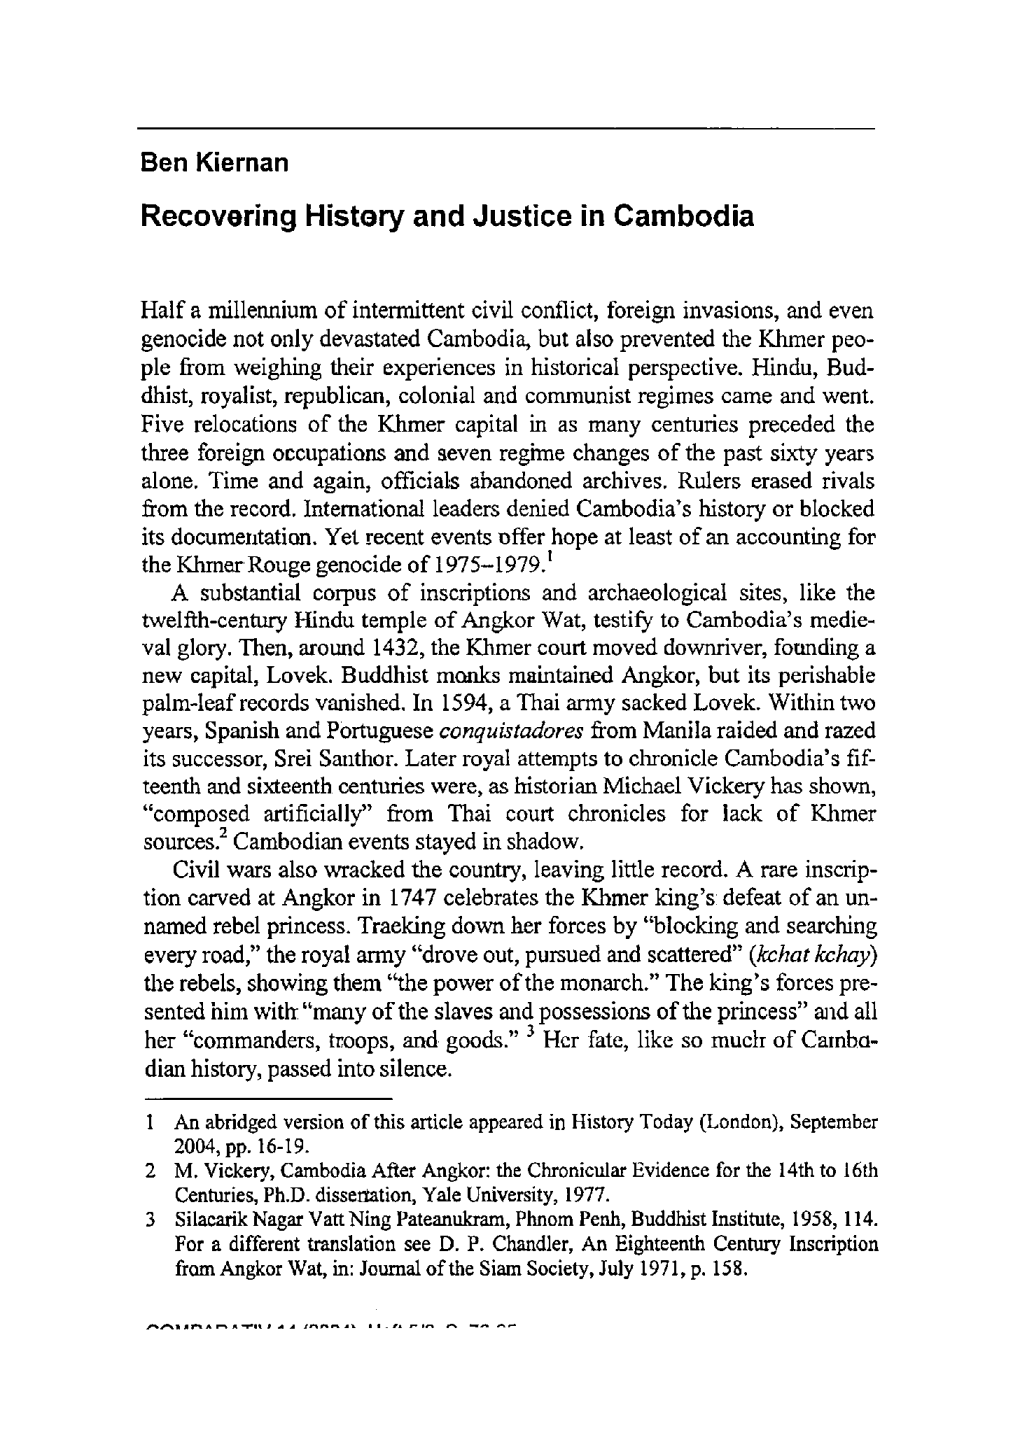 Recovering History and Justice in Cambodia